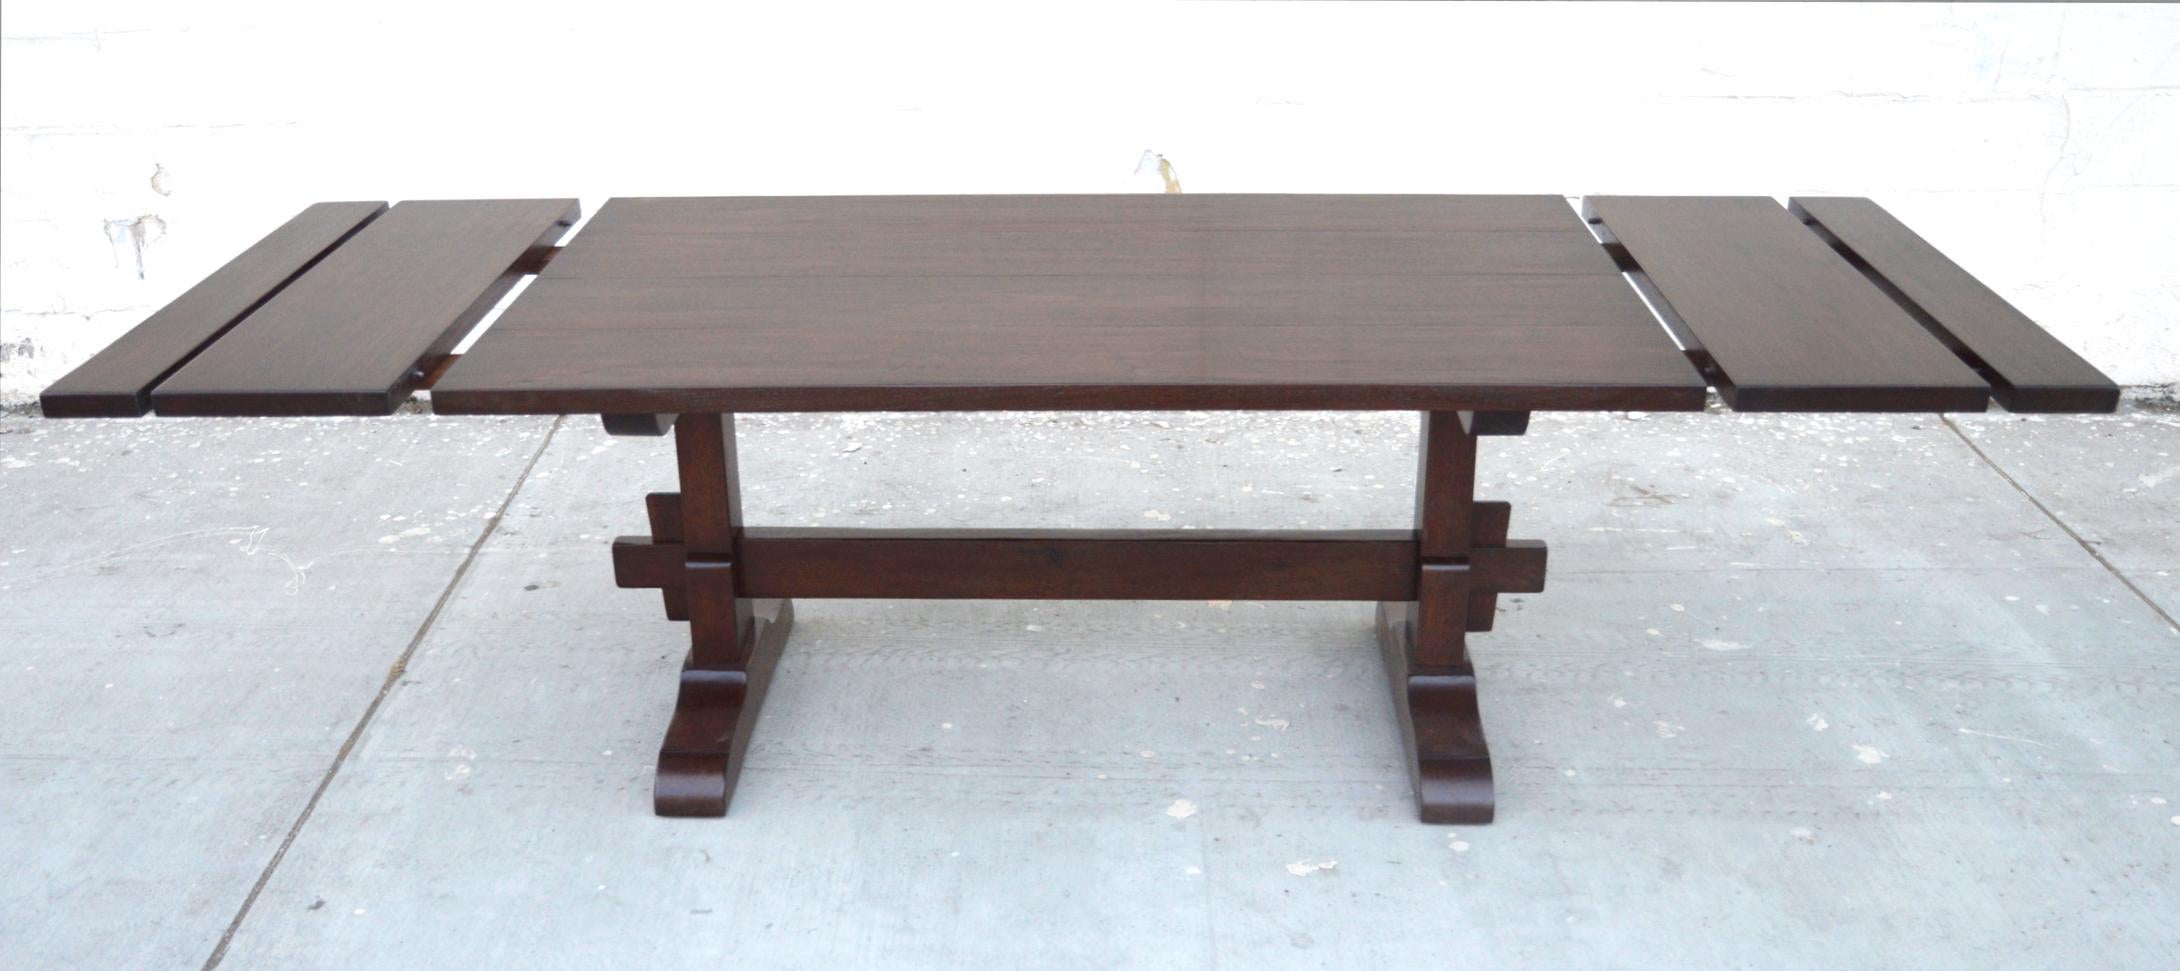 North American Evy Trestle Table, Built to Order by Petersen Antiques (expandable) For Sale